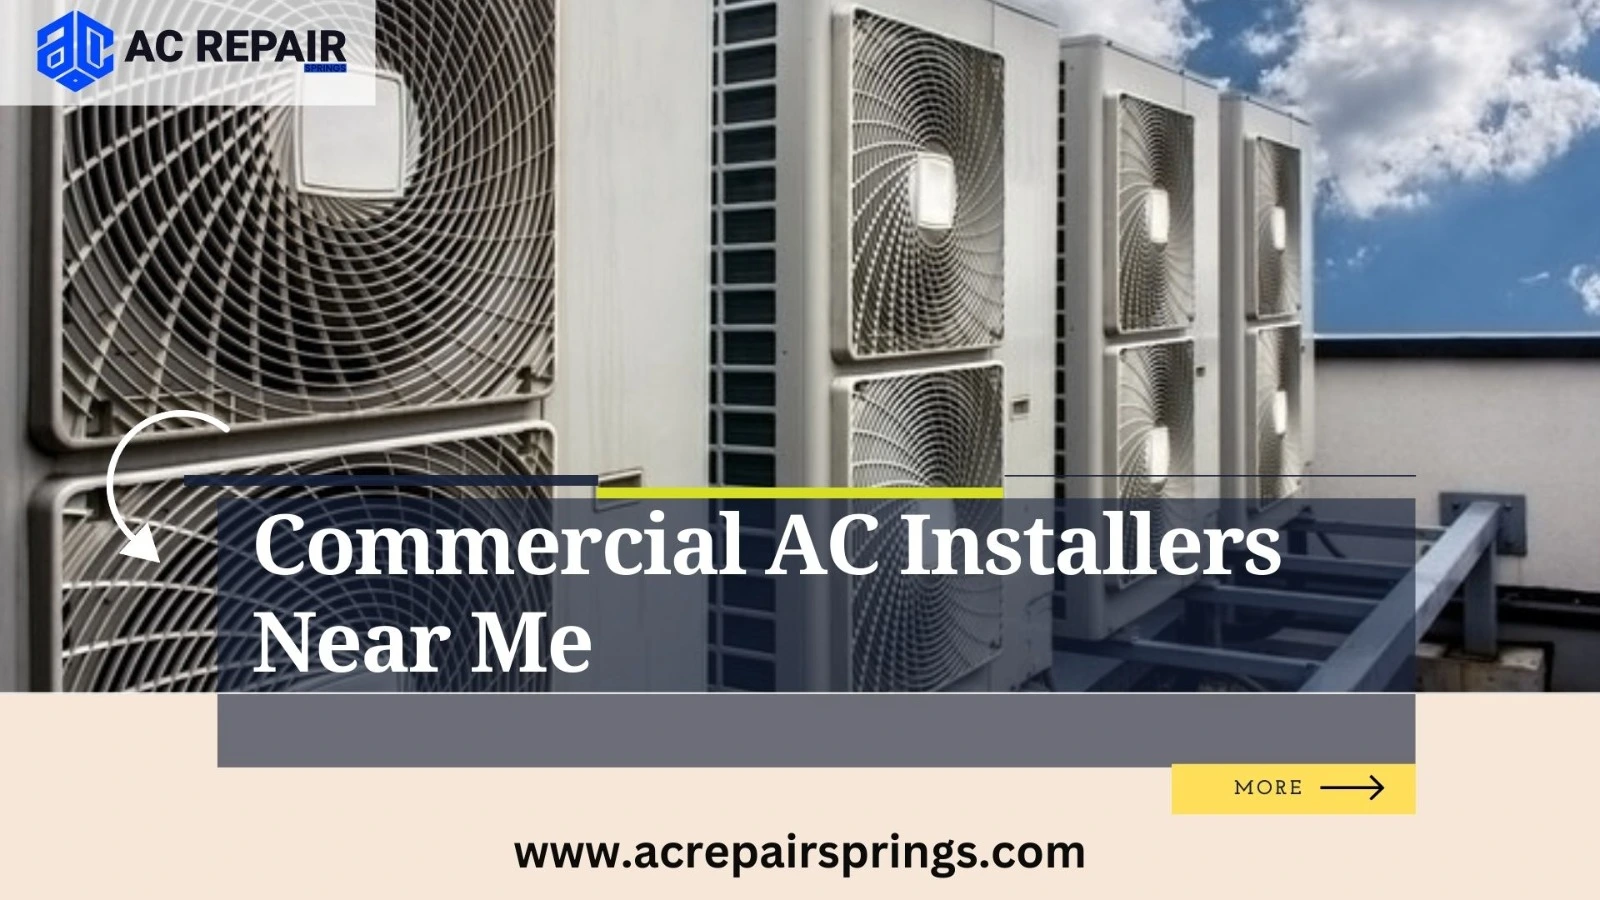 Commercial AC Installers Near Me